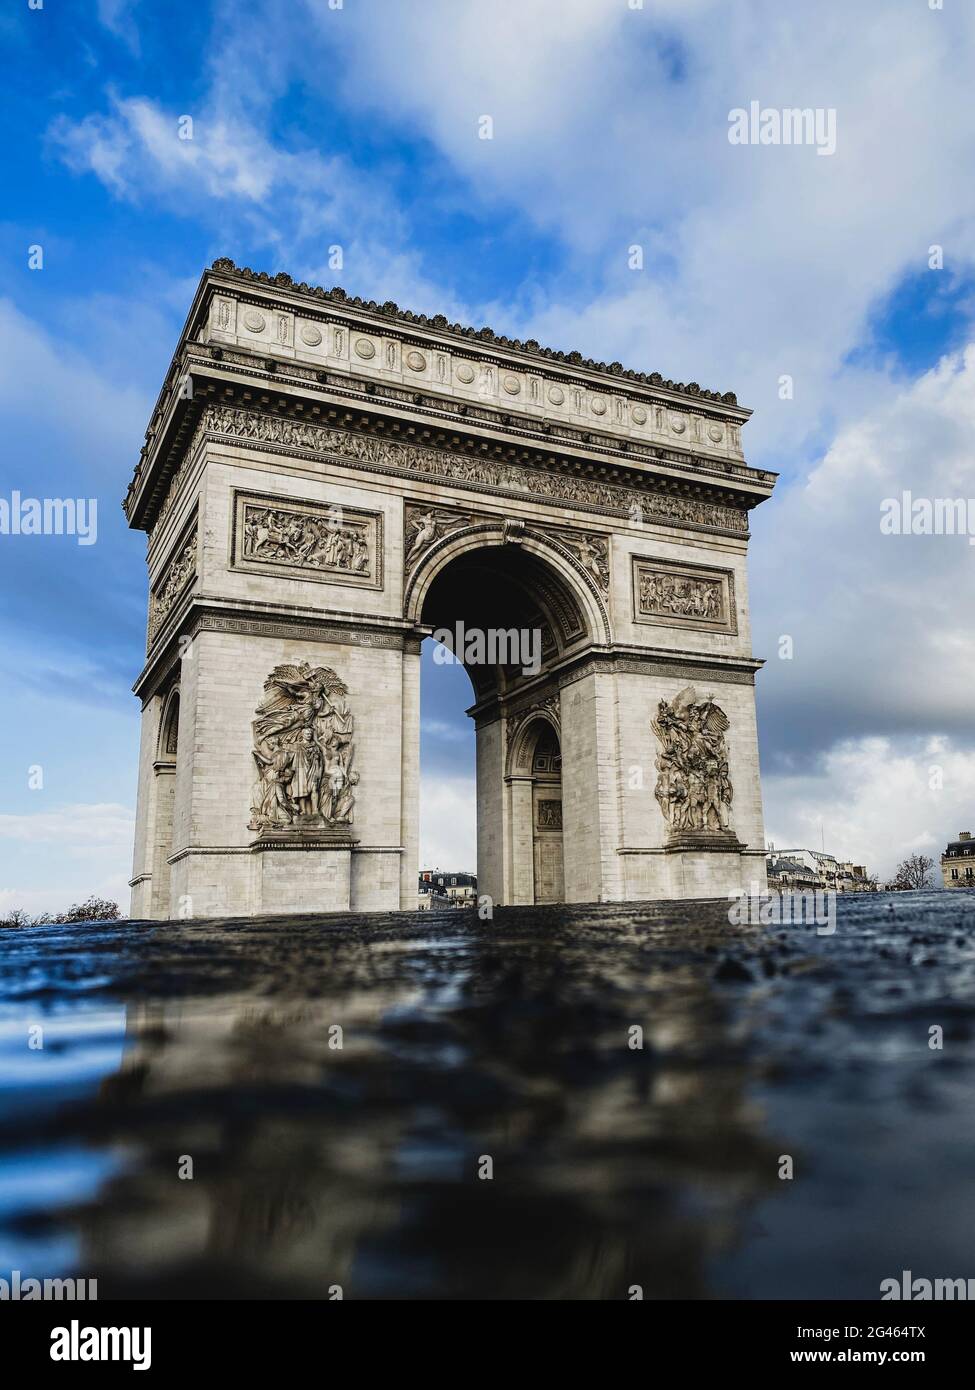 Paris, arch triumph during a bright cloudy day Stock Photo